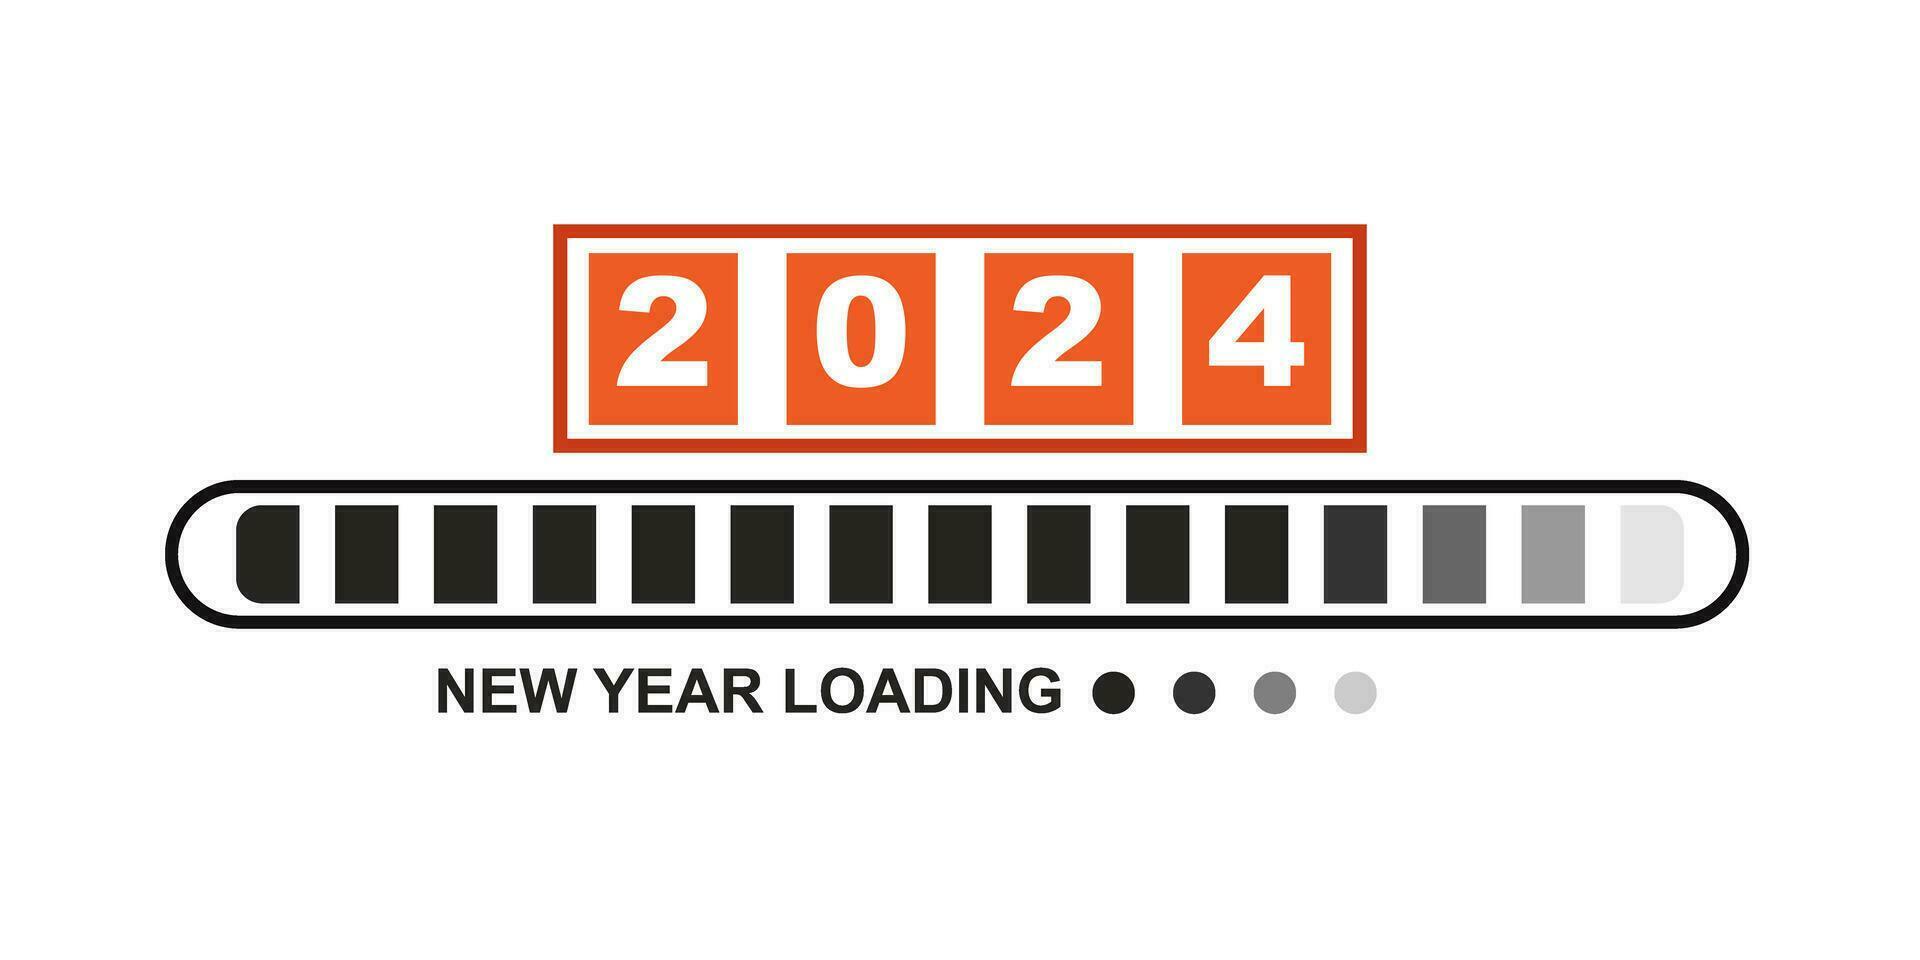 Loading 2023 to 2024 progress bar. Happy new year 2024 welcome. Year changing from 2023 to 2024. end of 2023 and starting of 2024. Almost reaching New Year Wishes 2024. start goal and planning. vector